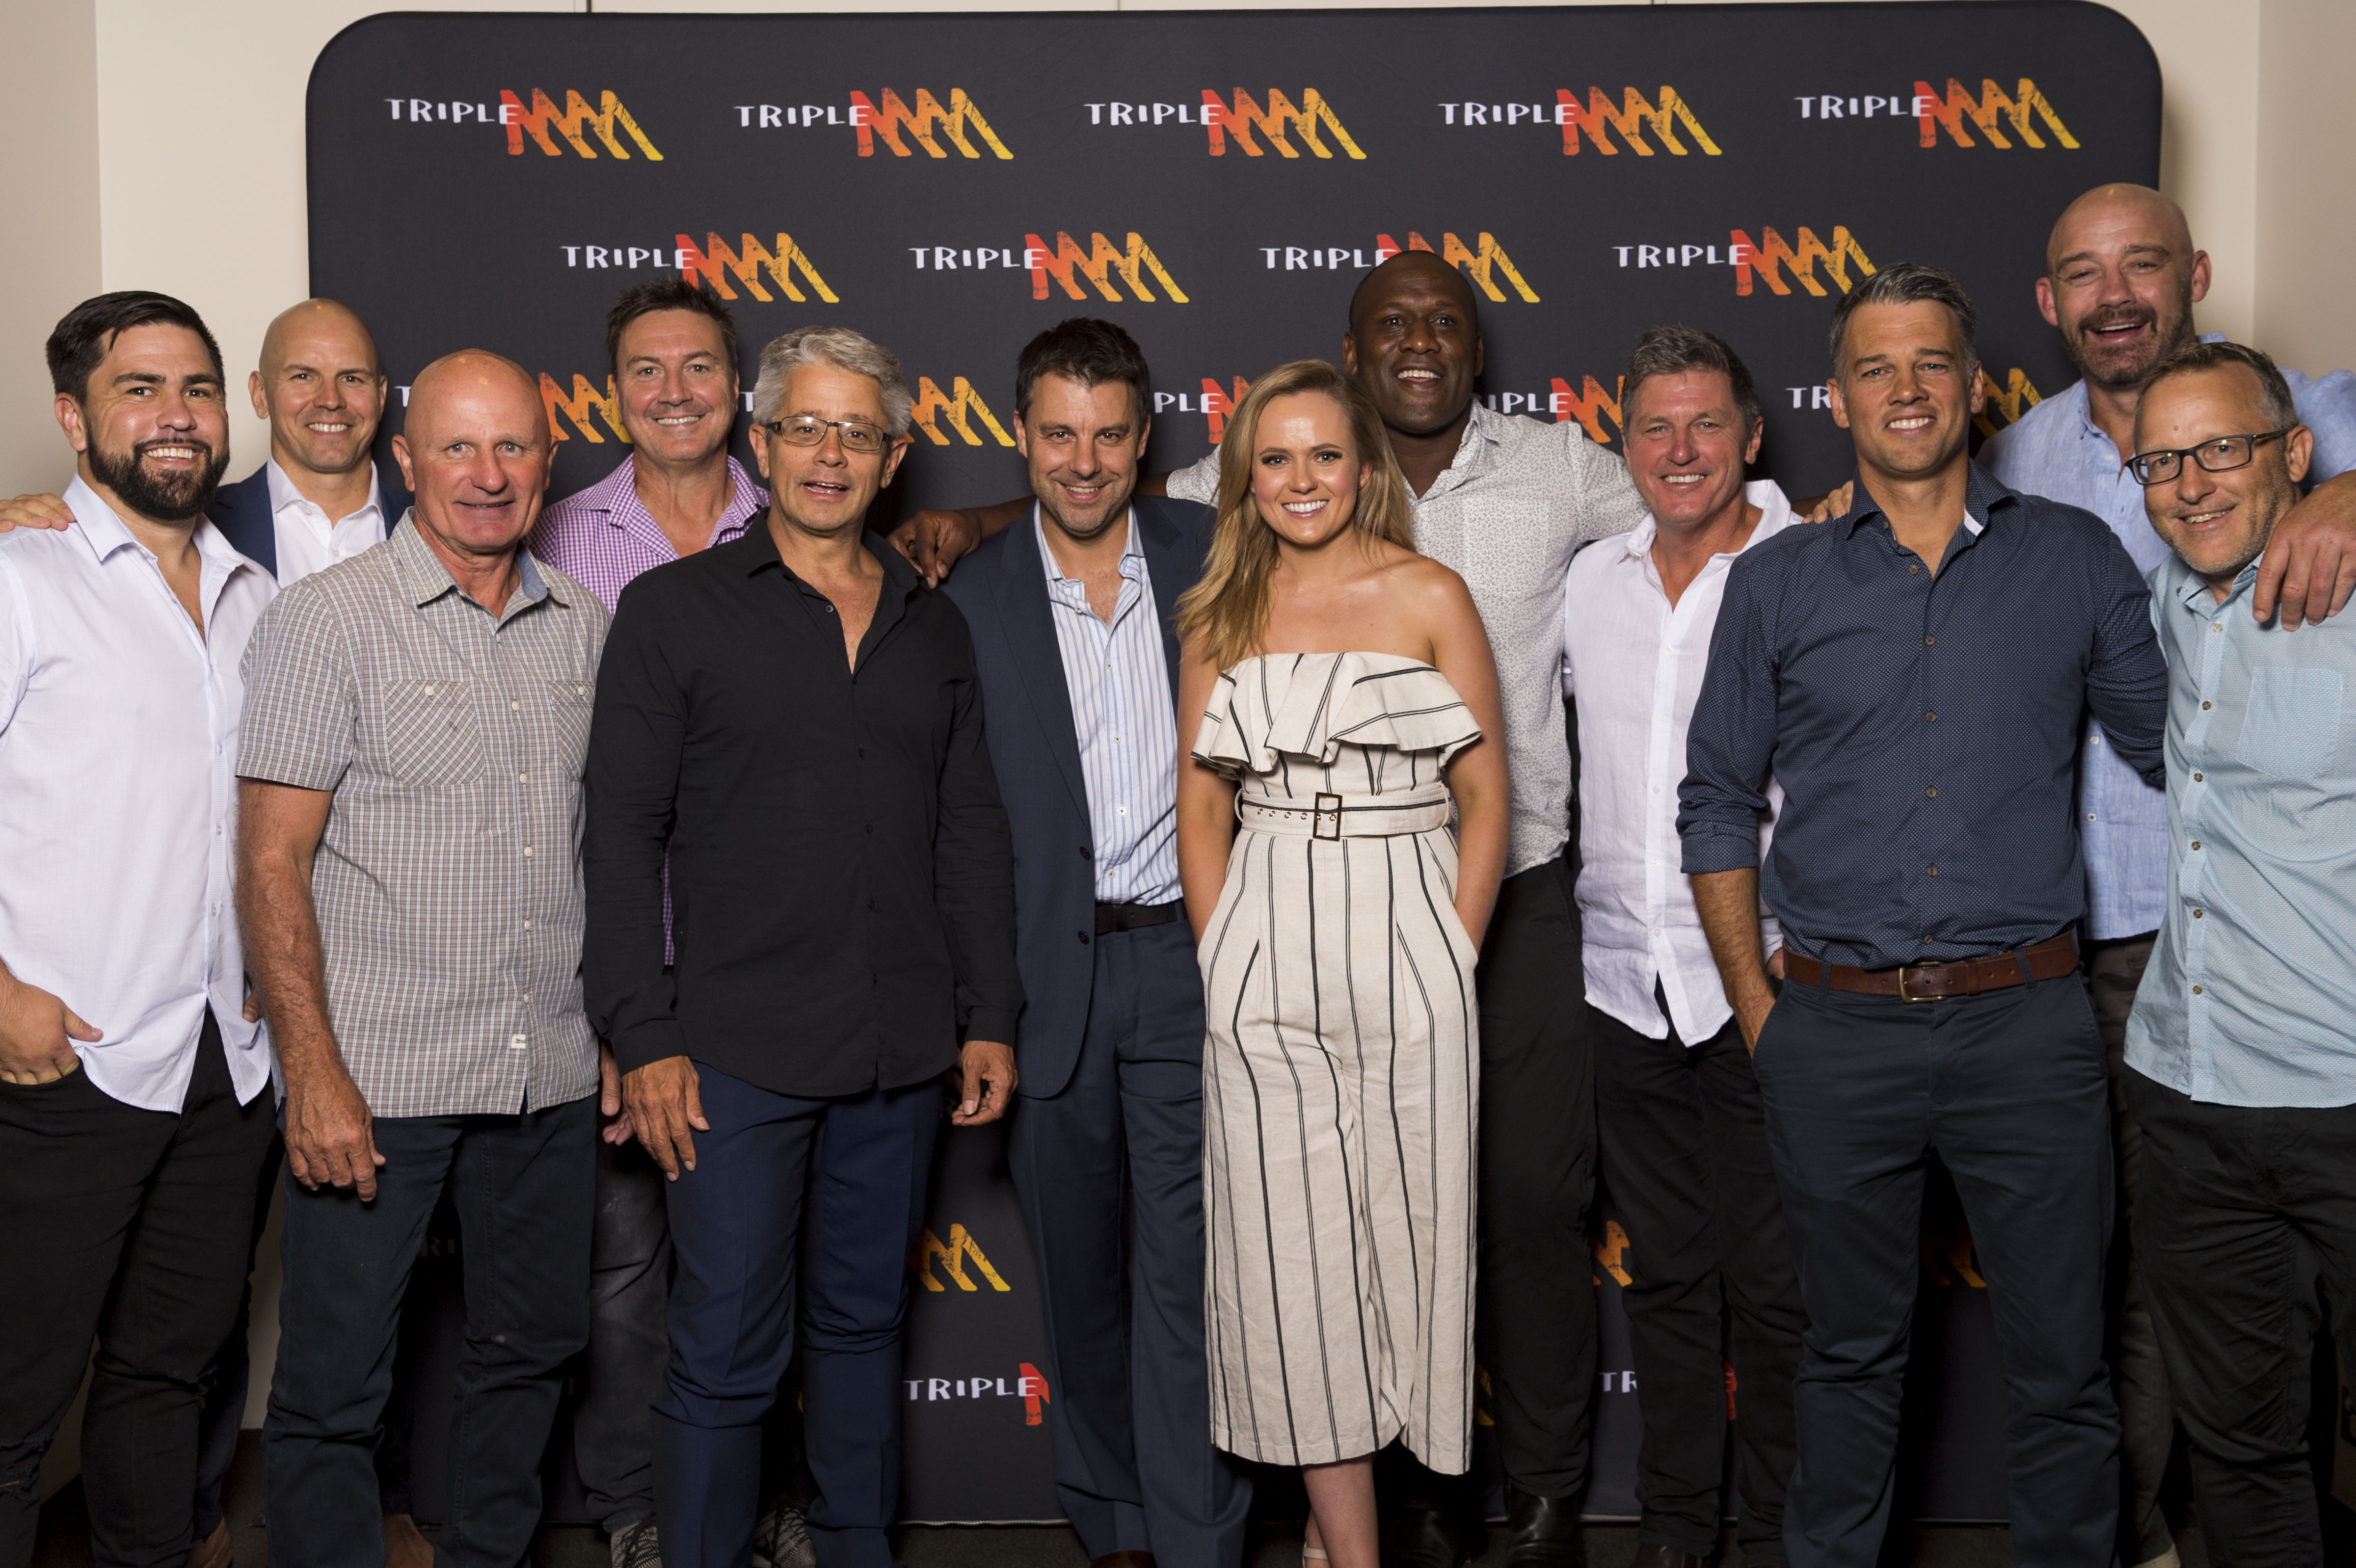 Triple M renews NRL broadcast rights, appoints Sam Hargreaves as Sports Guy for Brisbane